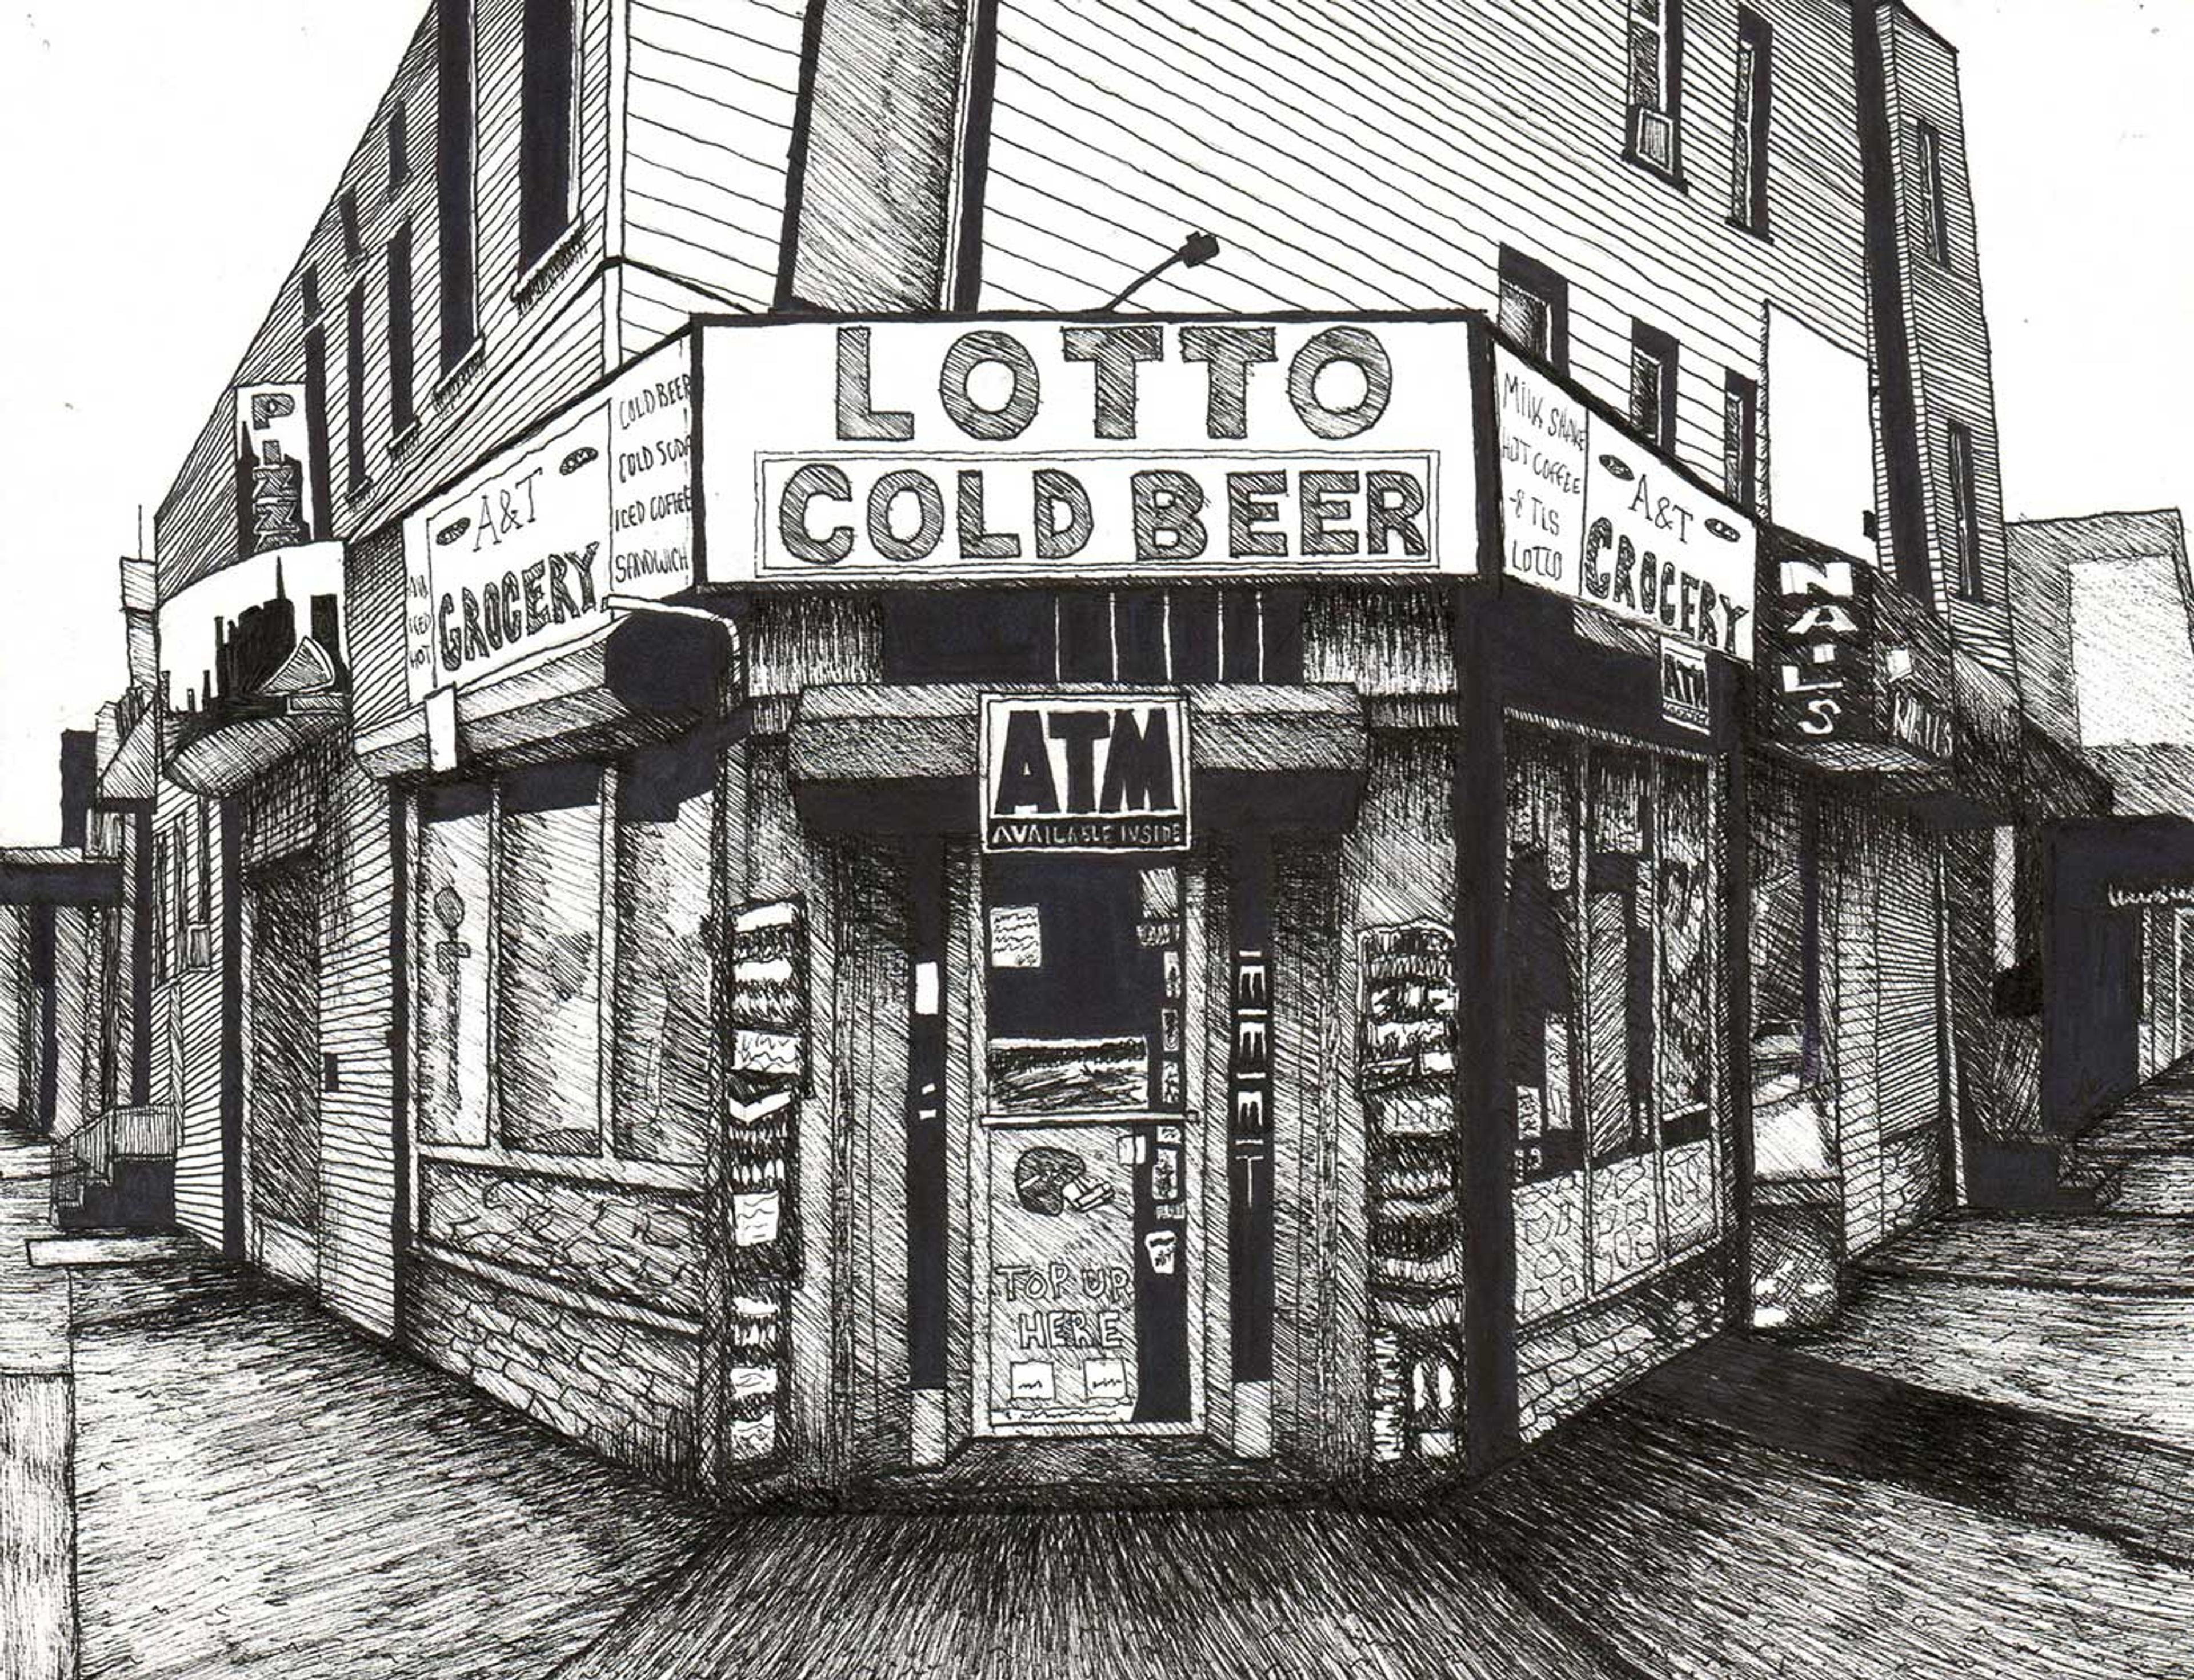 Pencil drawing of a corner grocery store.